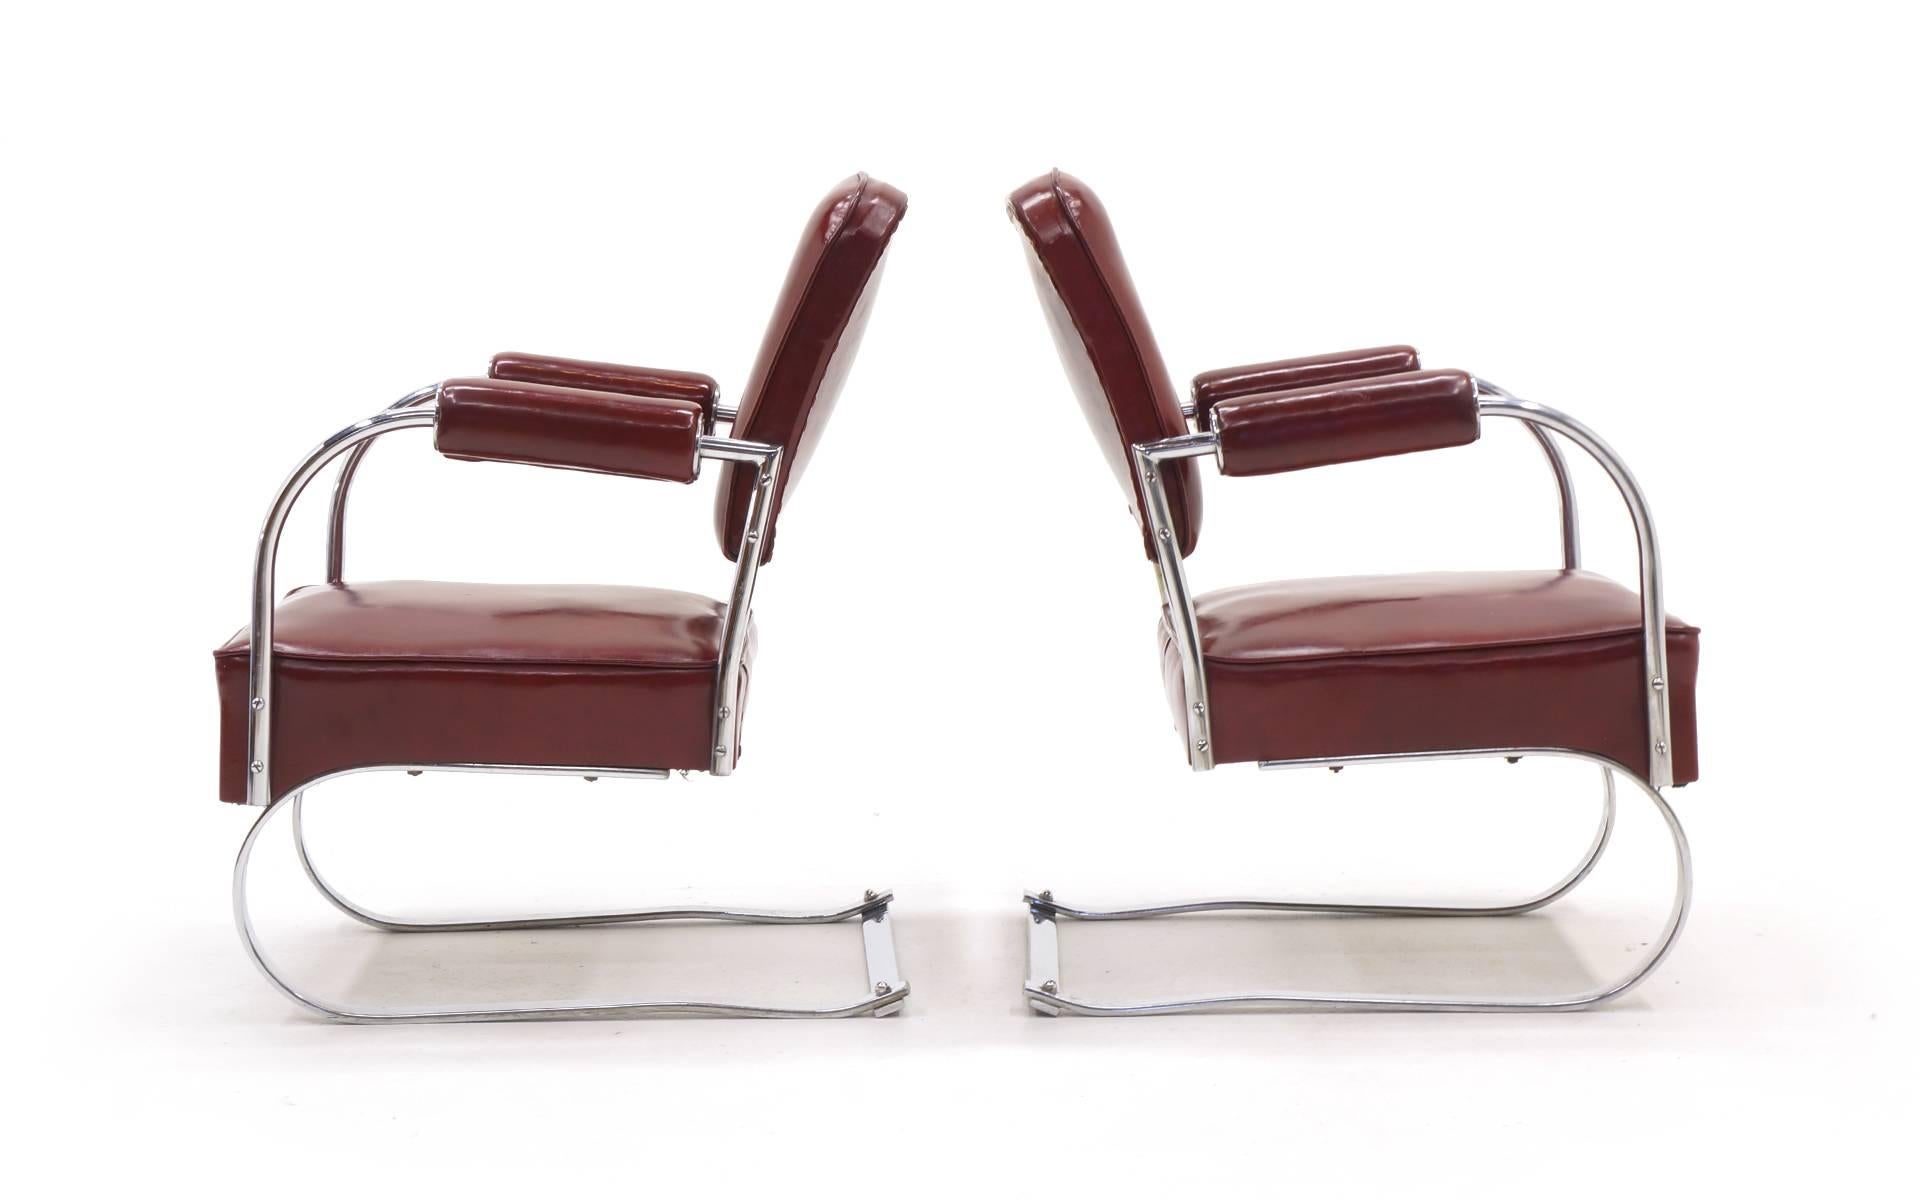 Pair of 1940s tubular chrome and completely original red vinyl lounge/club chairs designed by KEM Weber. These were covered in storage for the past 40 years. There are no tears or obvious wear to the original vinyl.